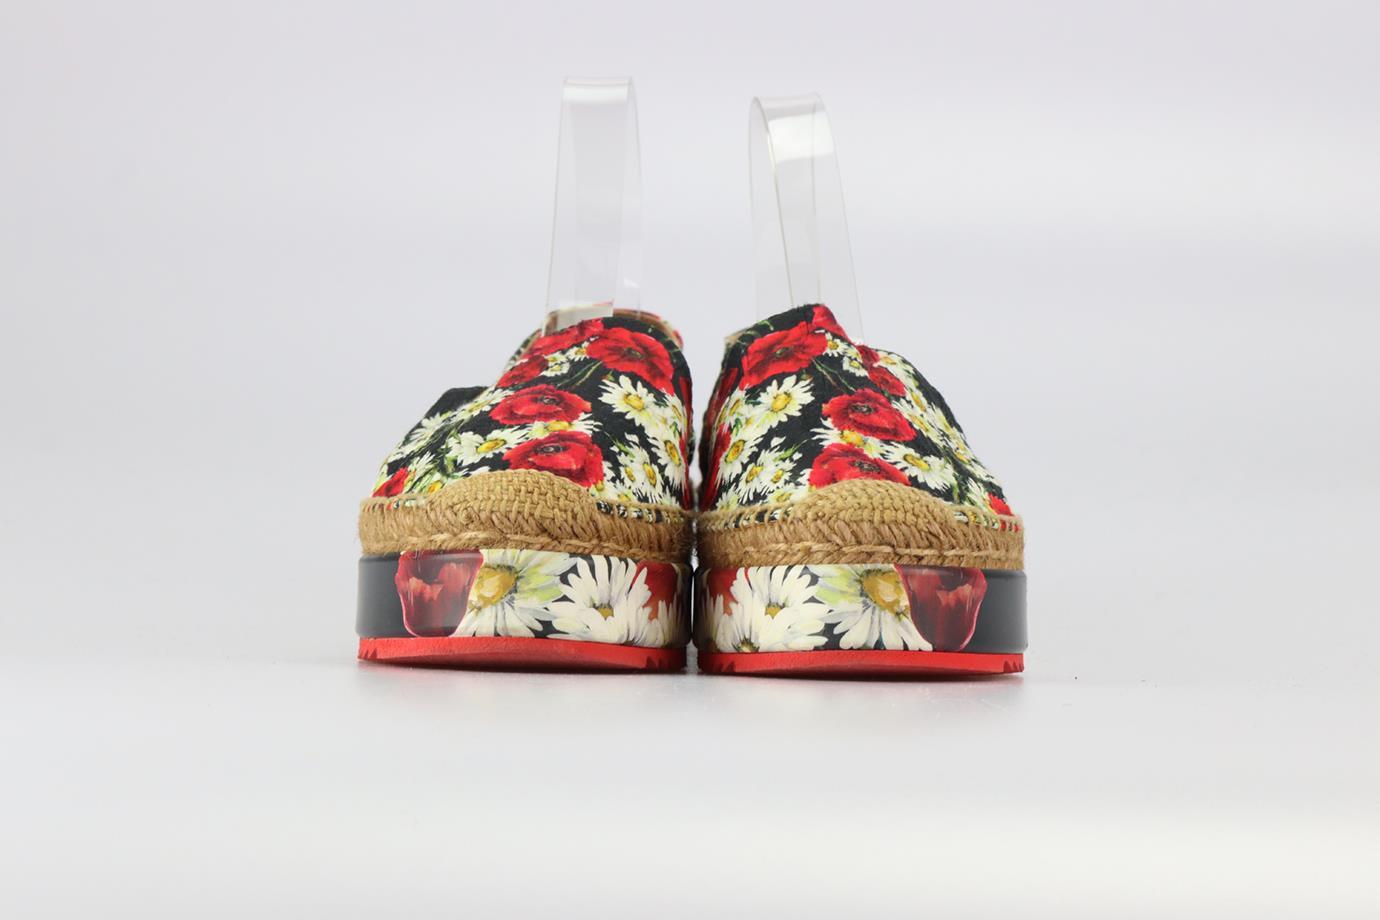 Dolce And Gabbana Floral Print Satin Platform Espadrille. Black, white and red. Slips on. Does not come with - dustbag or box. EU 40 (UK 7, US 10). Insole: 9.9 in. Heel height: 1.5 in. Platform: 1.2 in. Condition: Used. Very good condition - Some